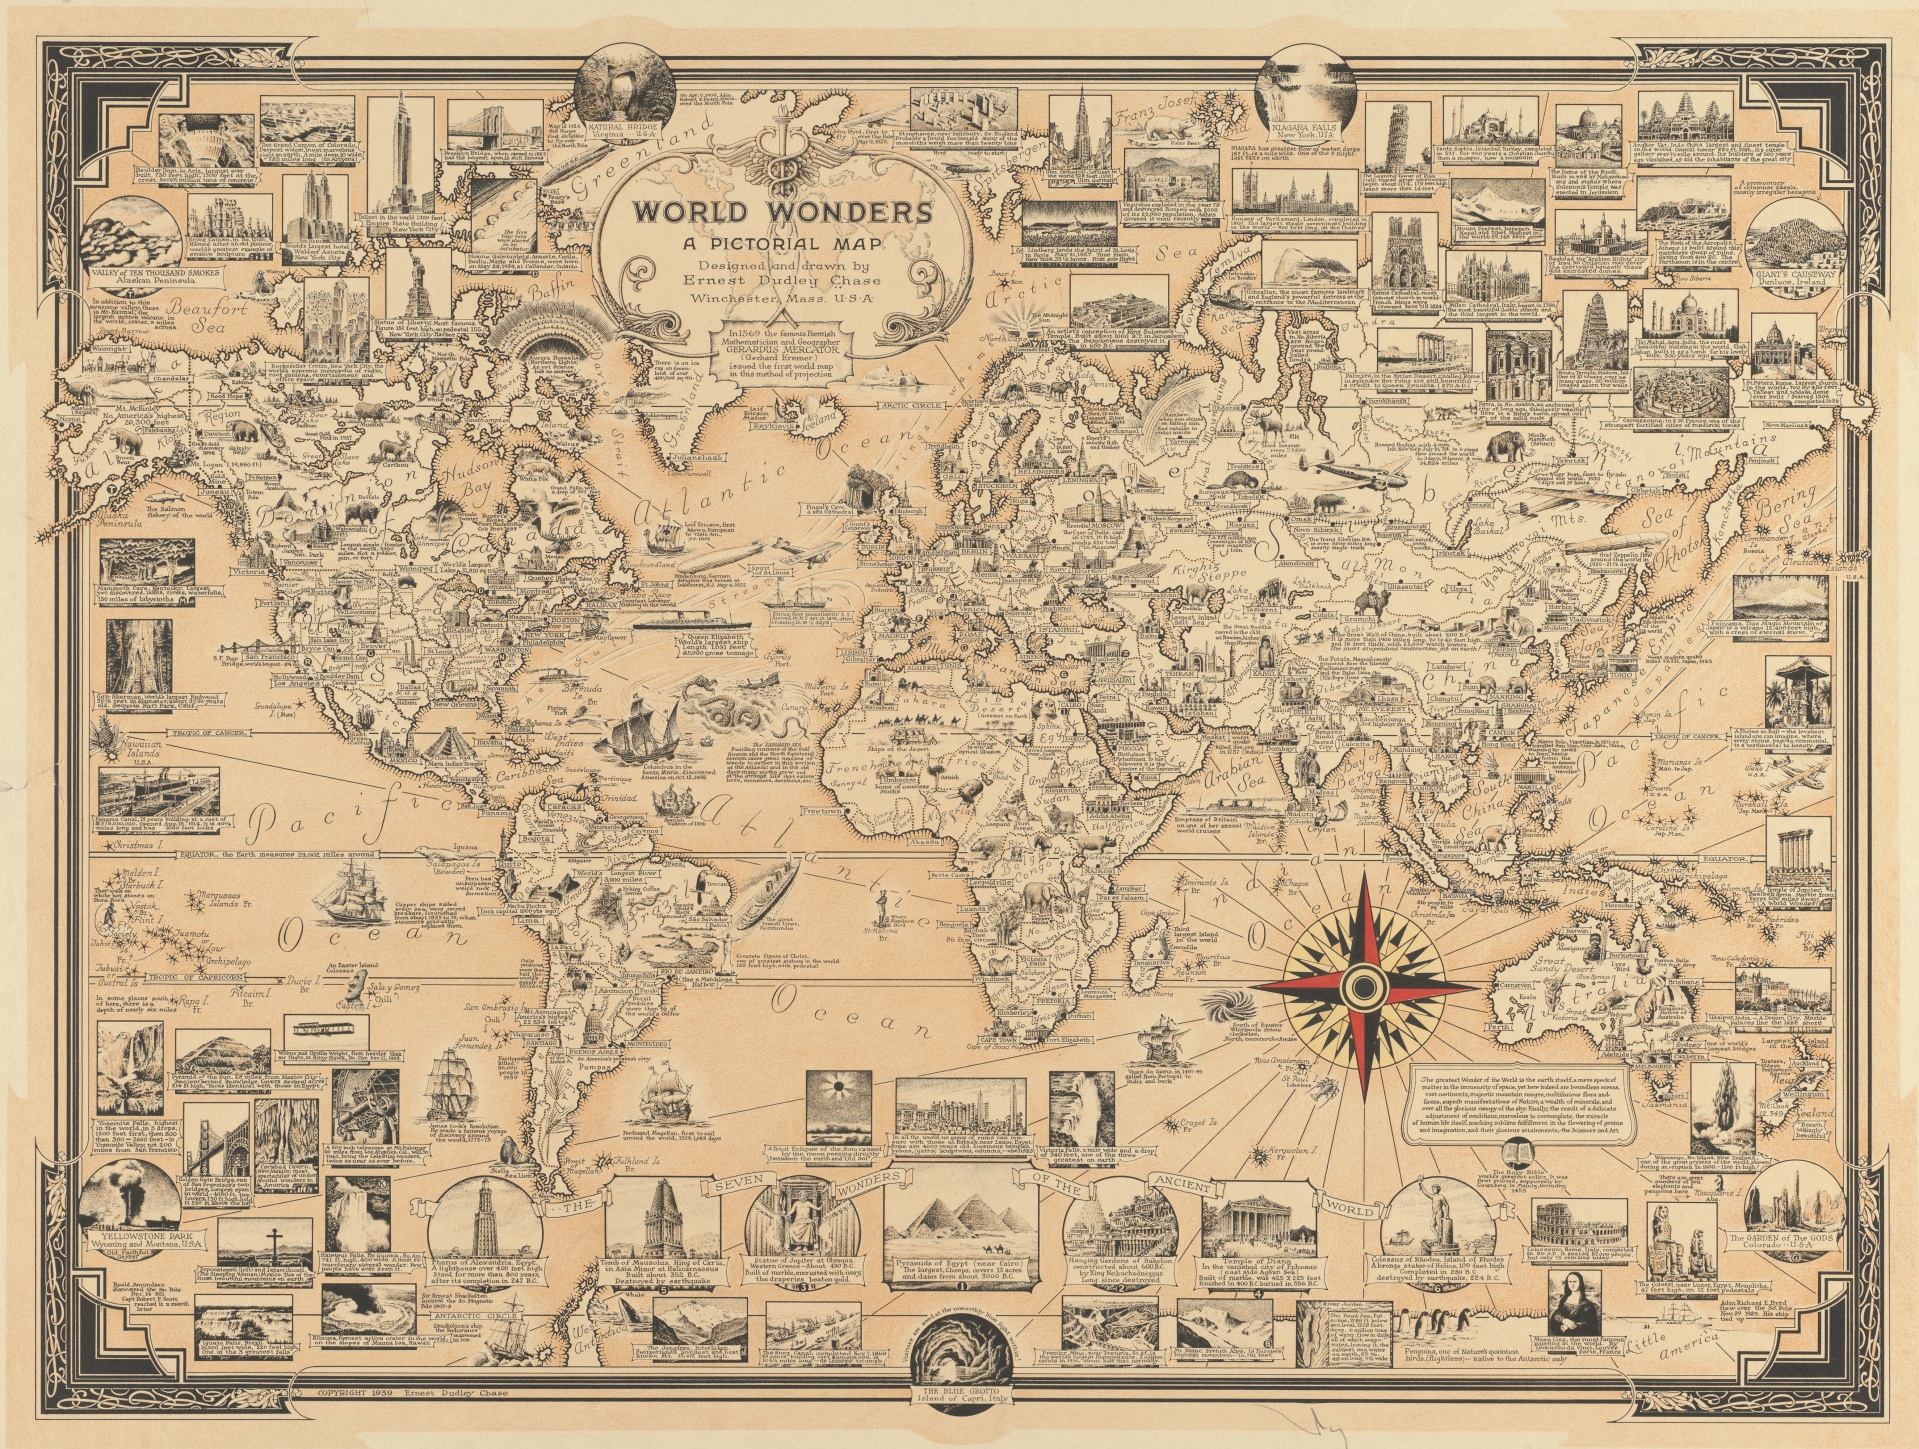 World Wonders - A Pictorial Map